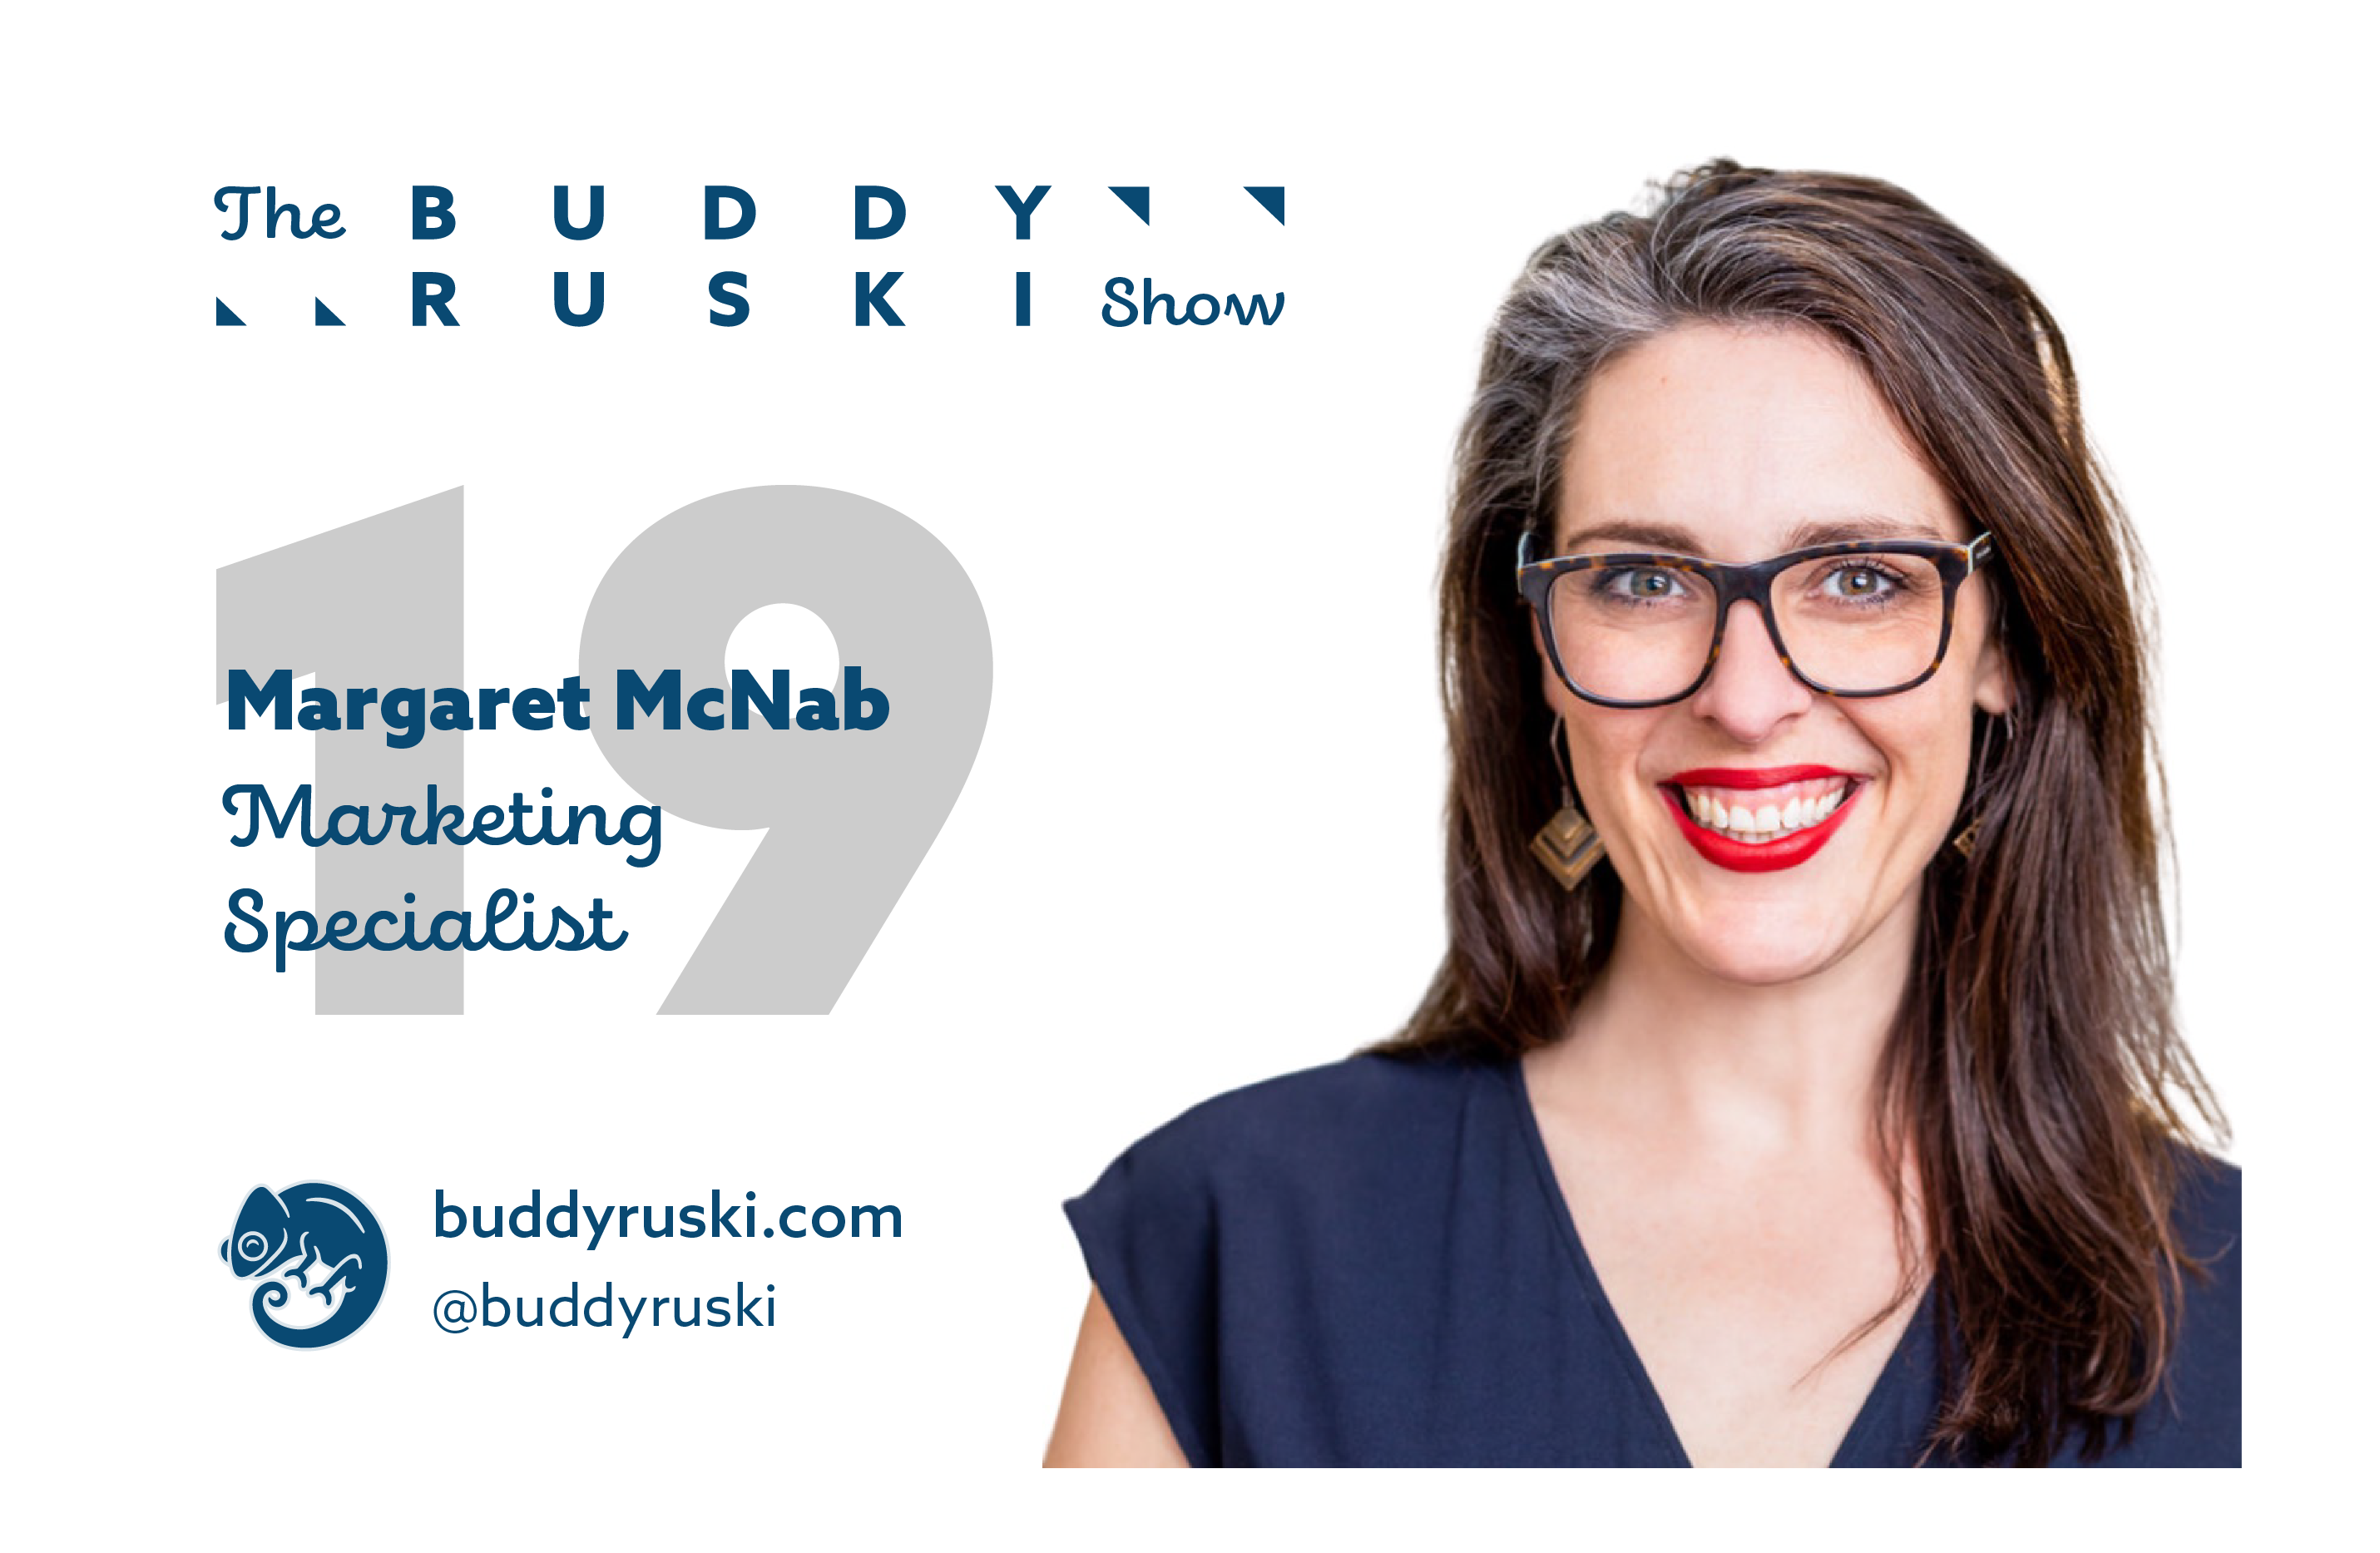 That Year in Prague and Post-Traumatic Growth with Margaret McNab | The Buddy Ruski Show (Ep. 19)